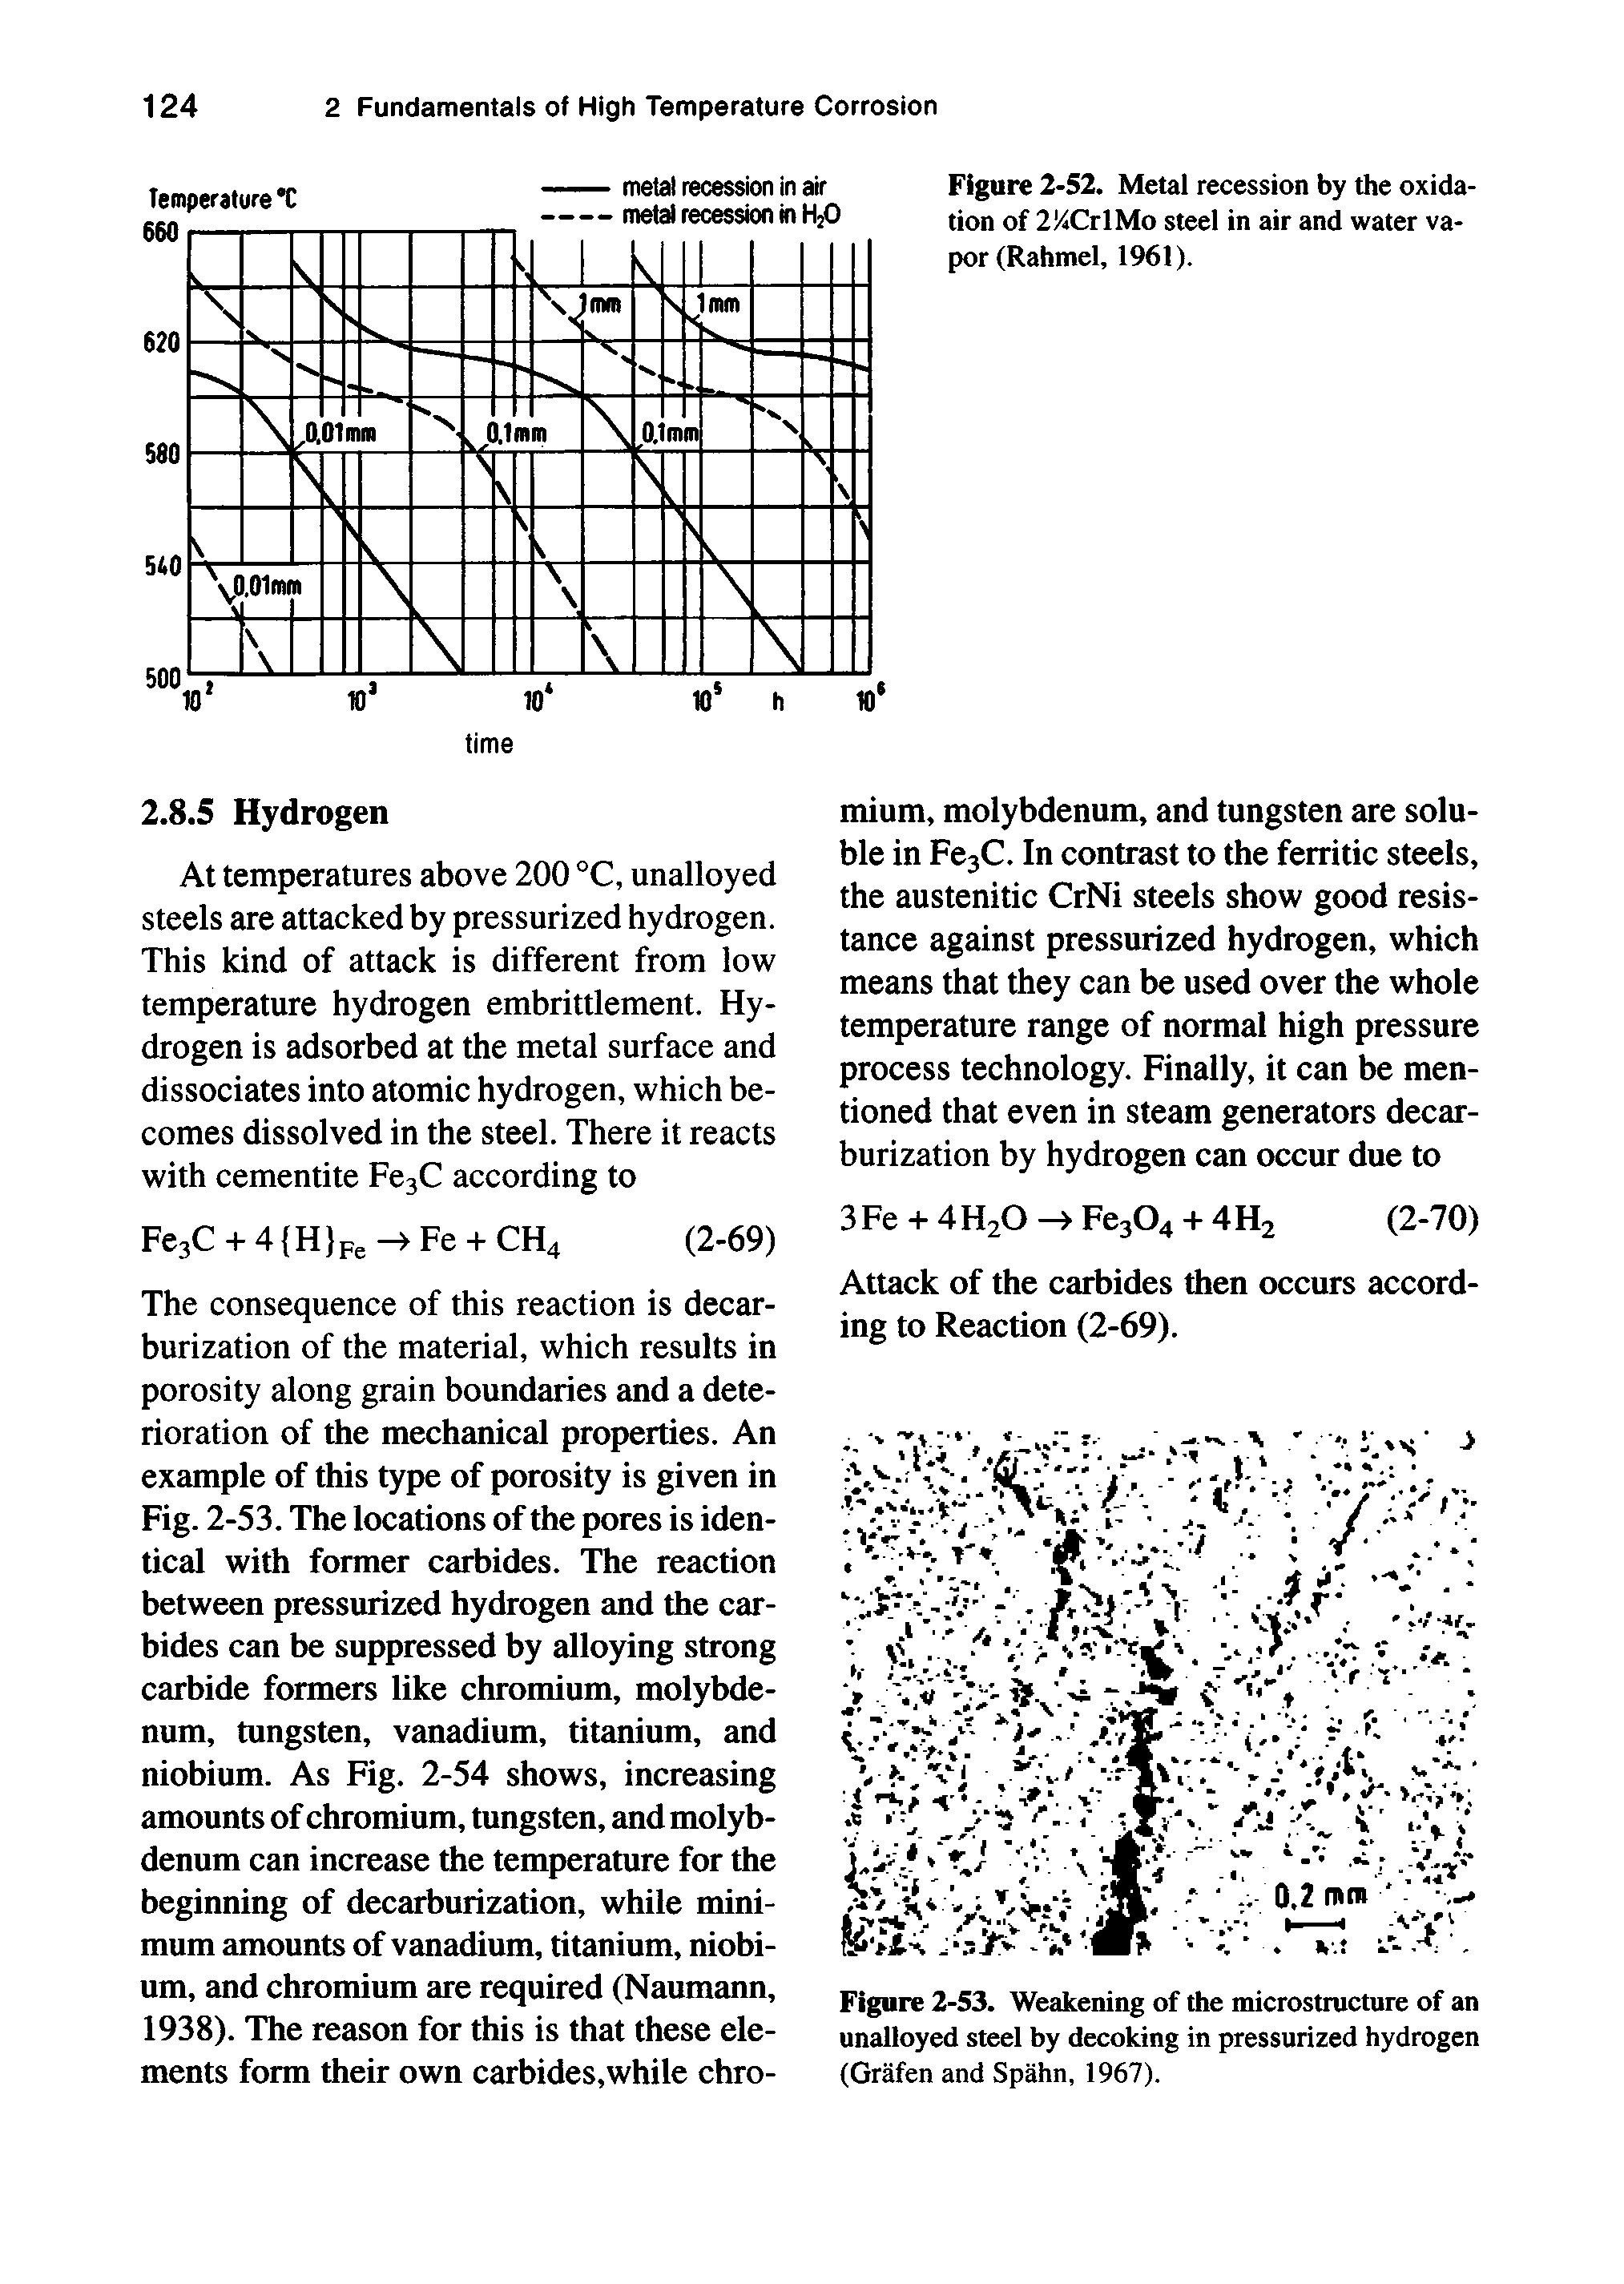 Figure 2-52. Metal recession by the oxidation of 2%CrlMo steel in air and water vapor (Rahmel, 1961).